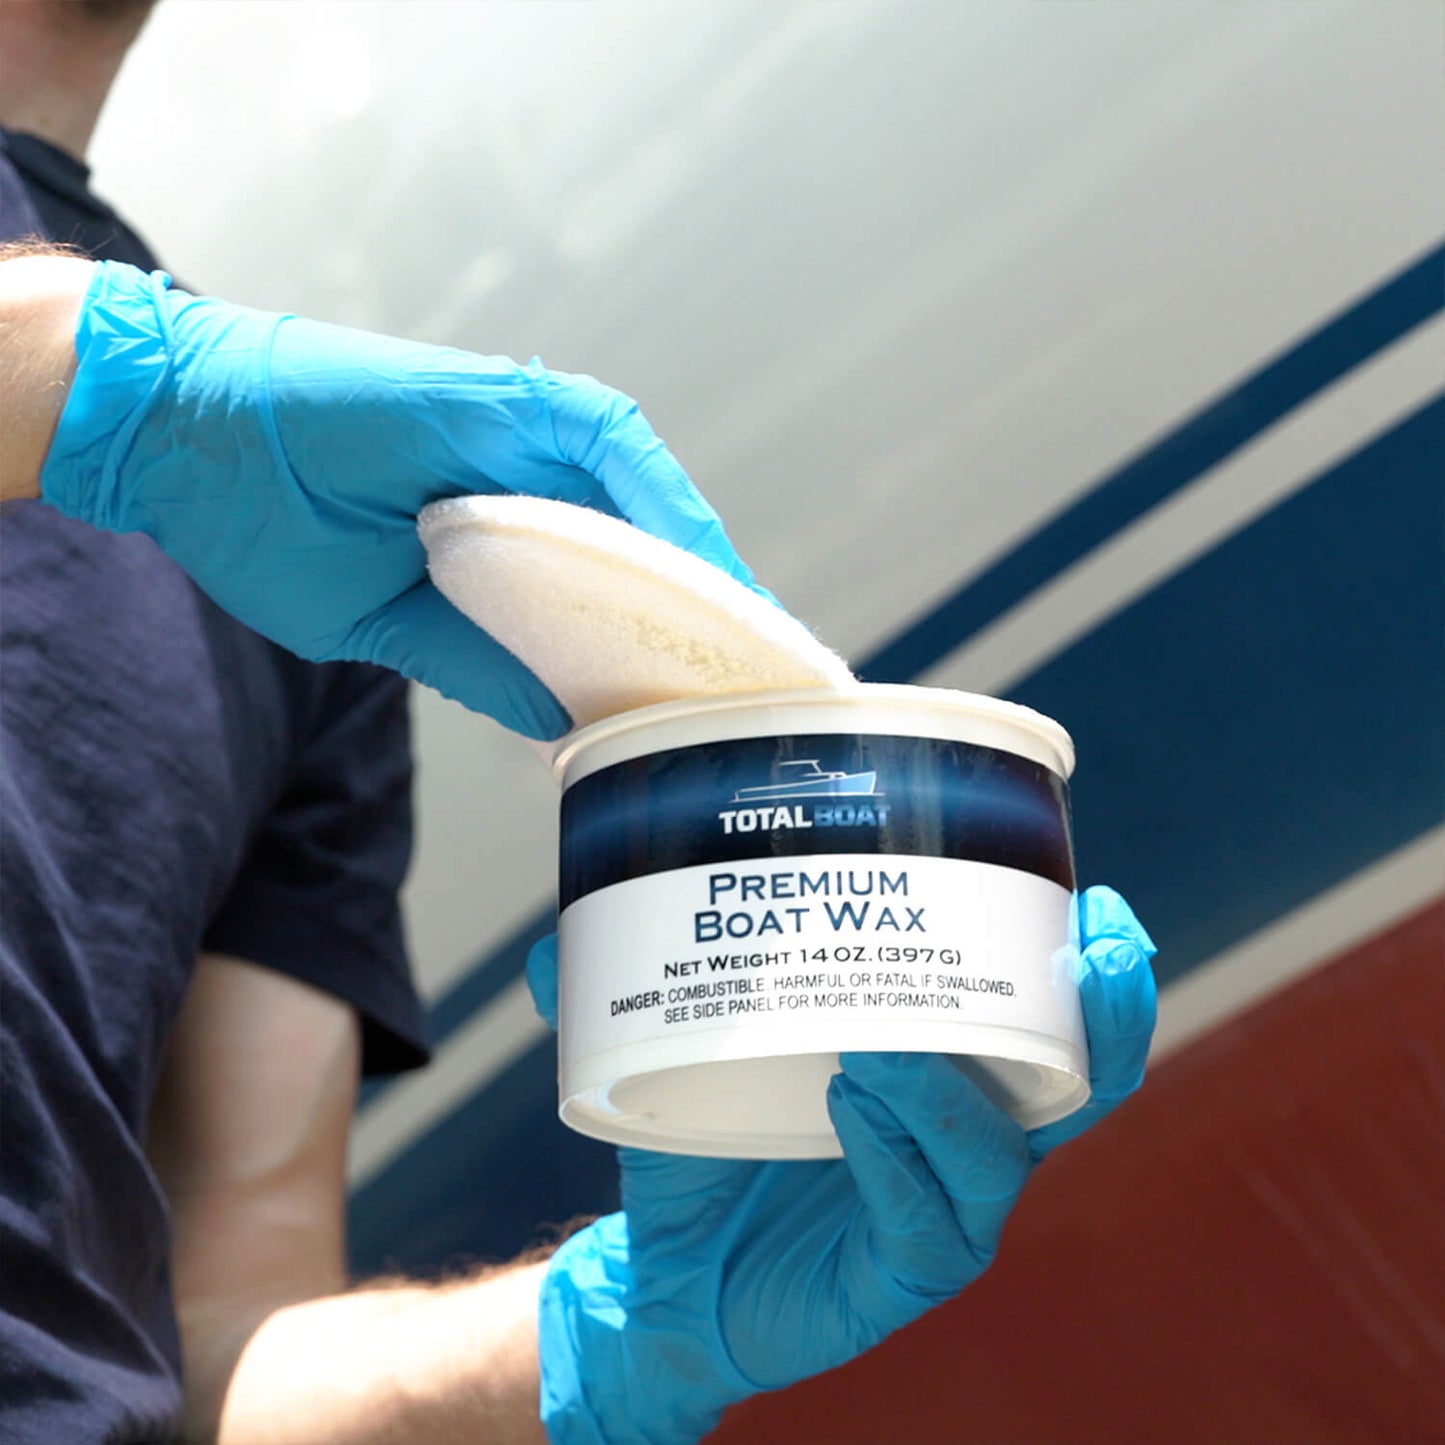 TotalBoat Premium Boat Wax being applied to a boat with a pad